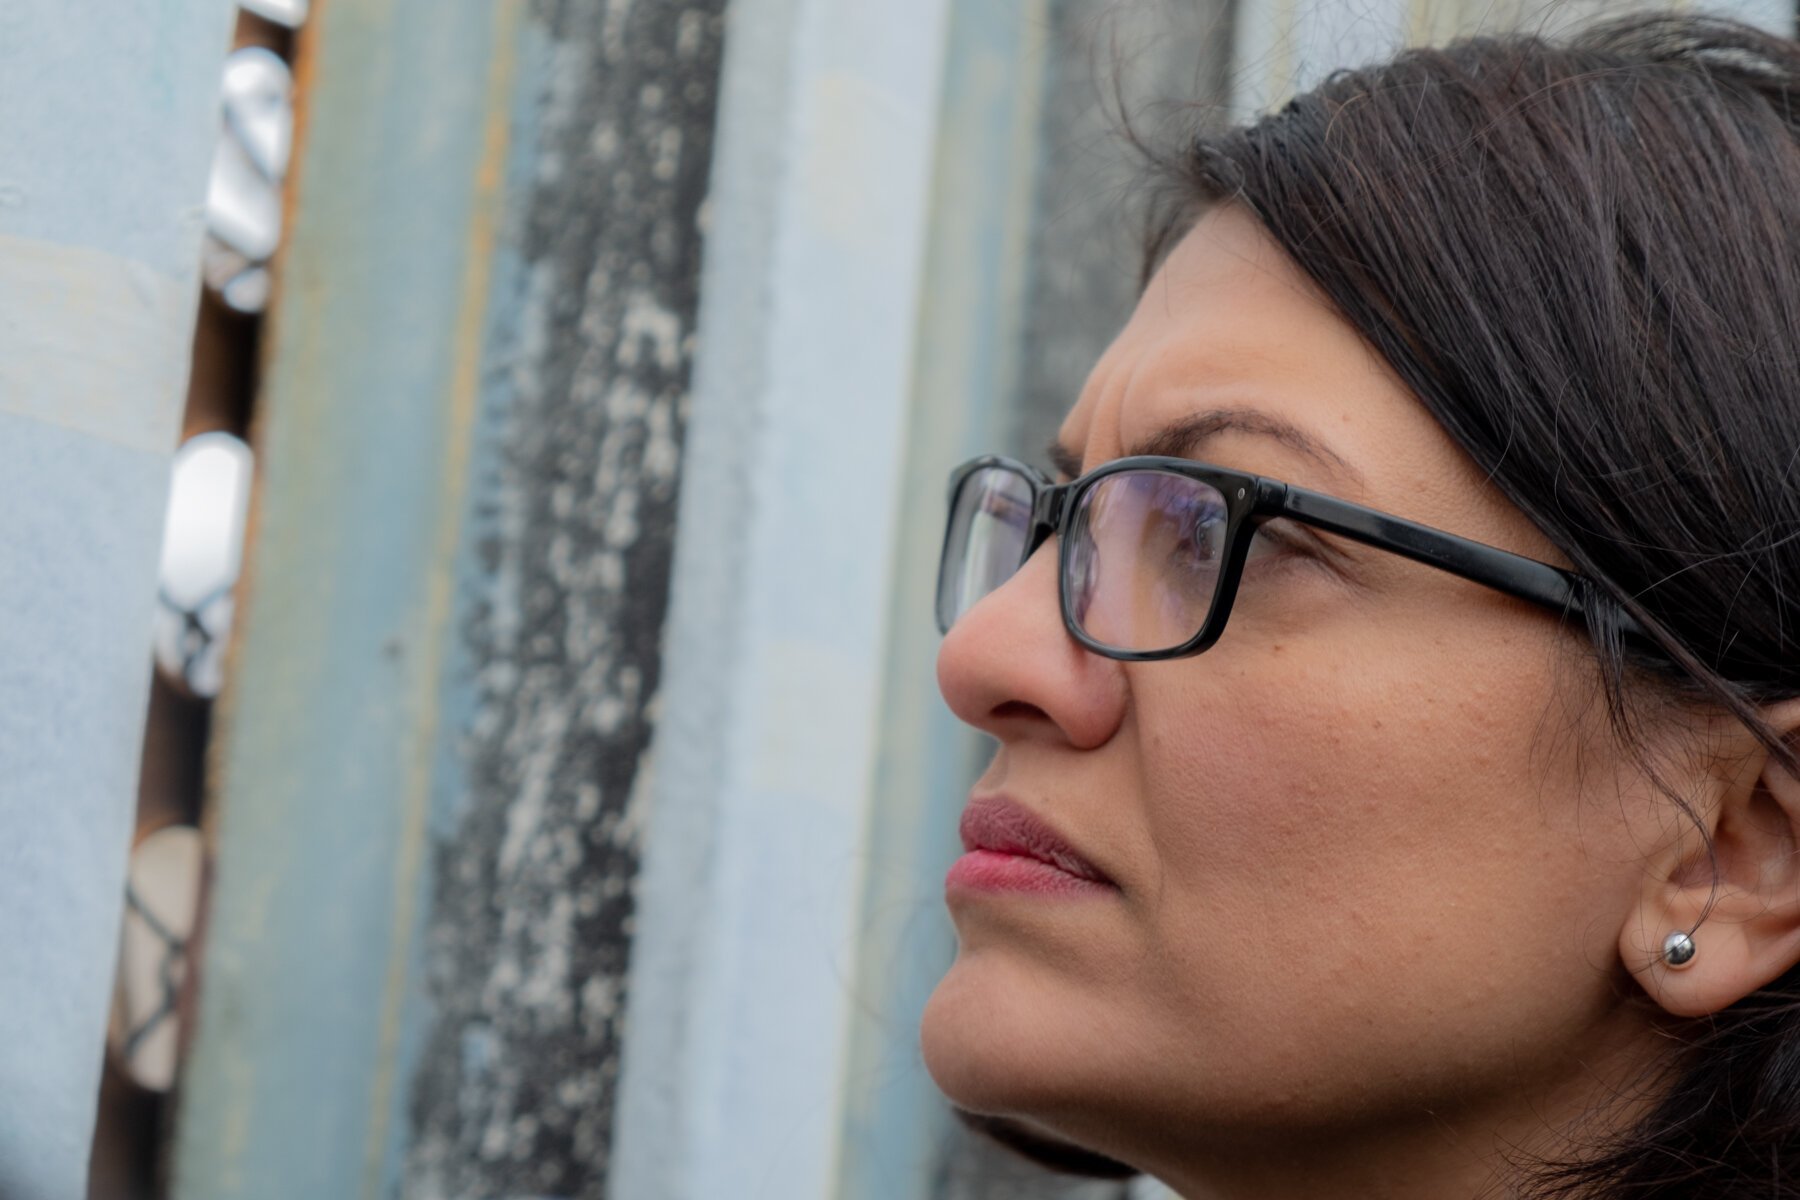  Congresswoman Rashida Tlaib looks across the U.S. Mexico border wall as she meets with deported veterans during her visit to Friendship Park in Playas de Tijuana, Baja California, Mexico on December 23, 2019. ©Aryana Noroozi 